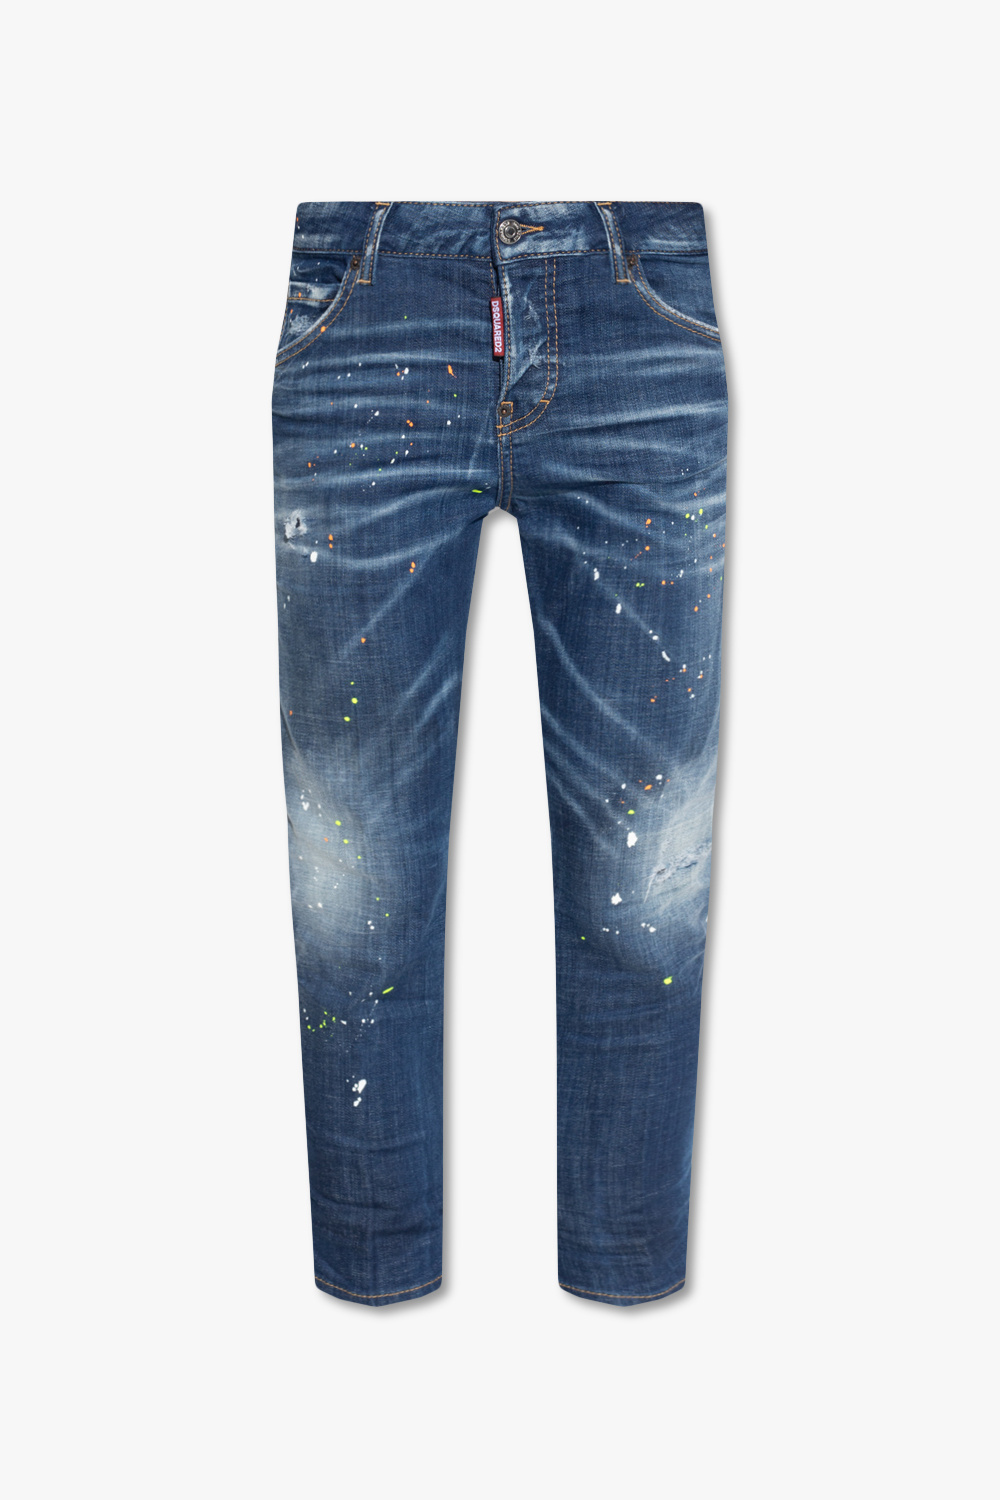 Dsquared2 ‘Cool Girl Cropped’ jeans